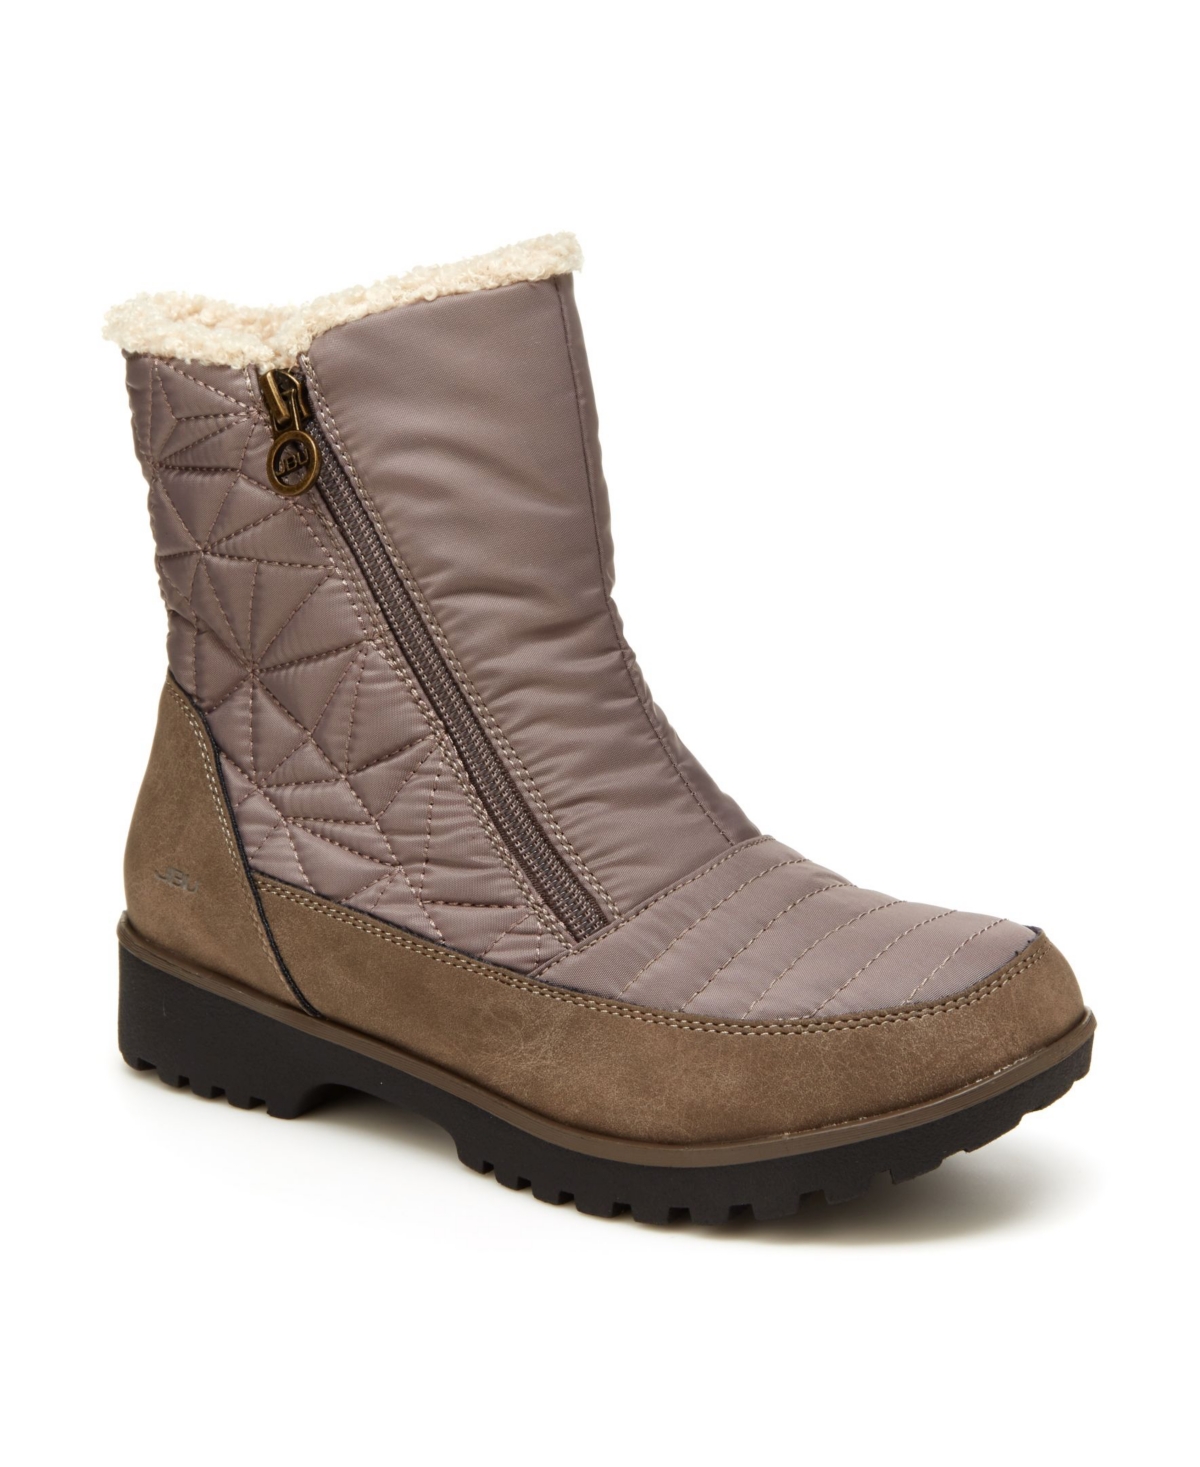 Women's Free Bird Casual Bootie - Taupe